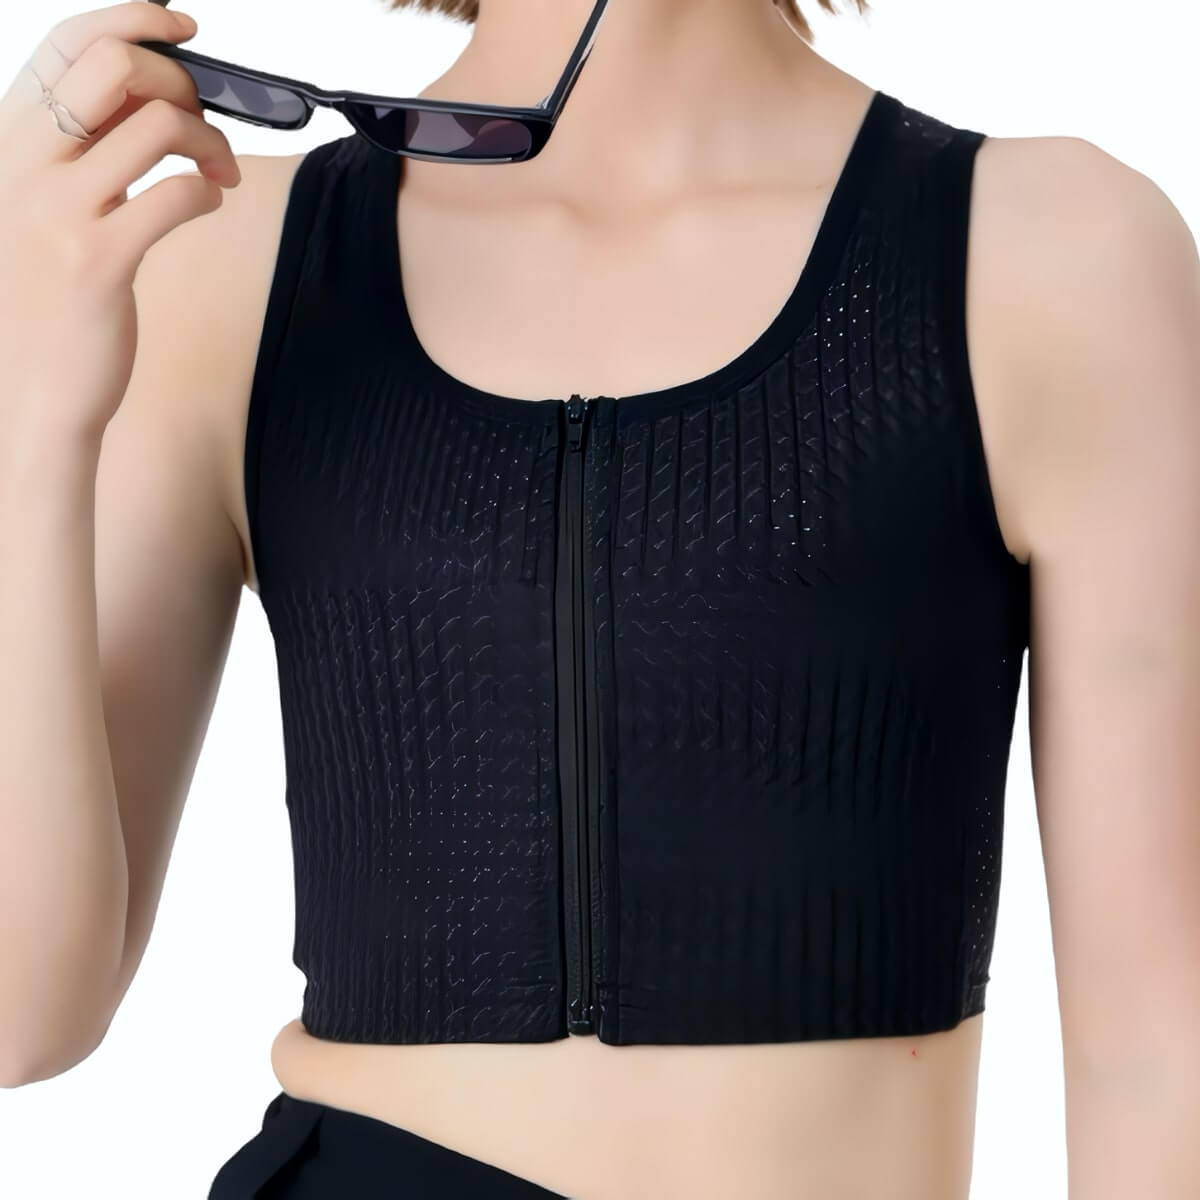 Tomboyx Compression Tank, Wireless Full Coverage Medium Support